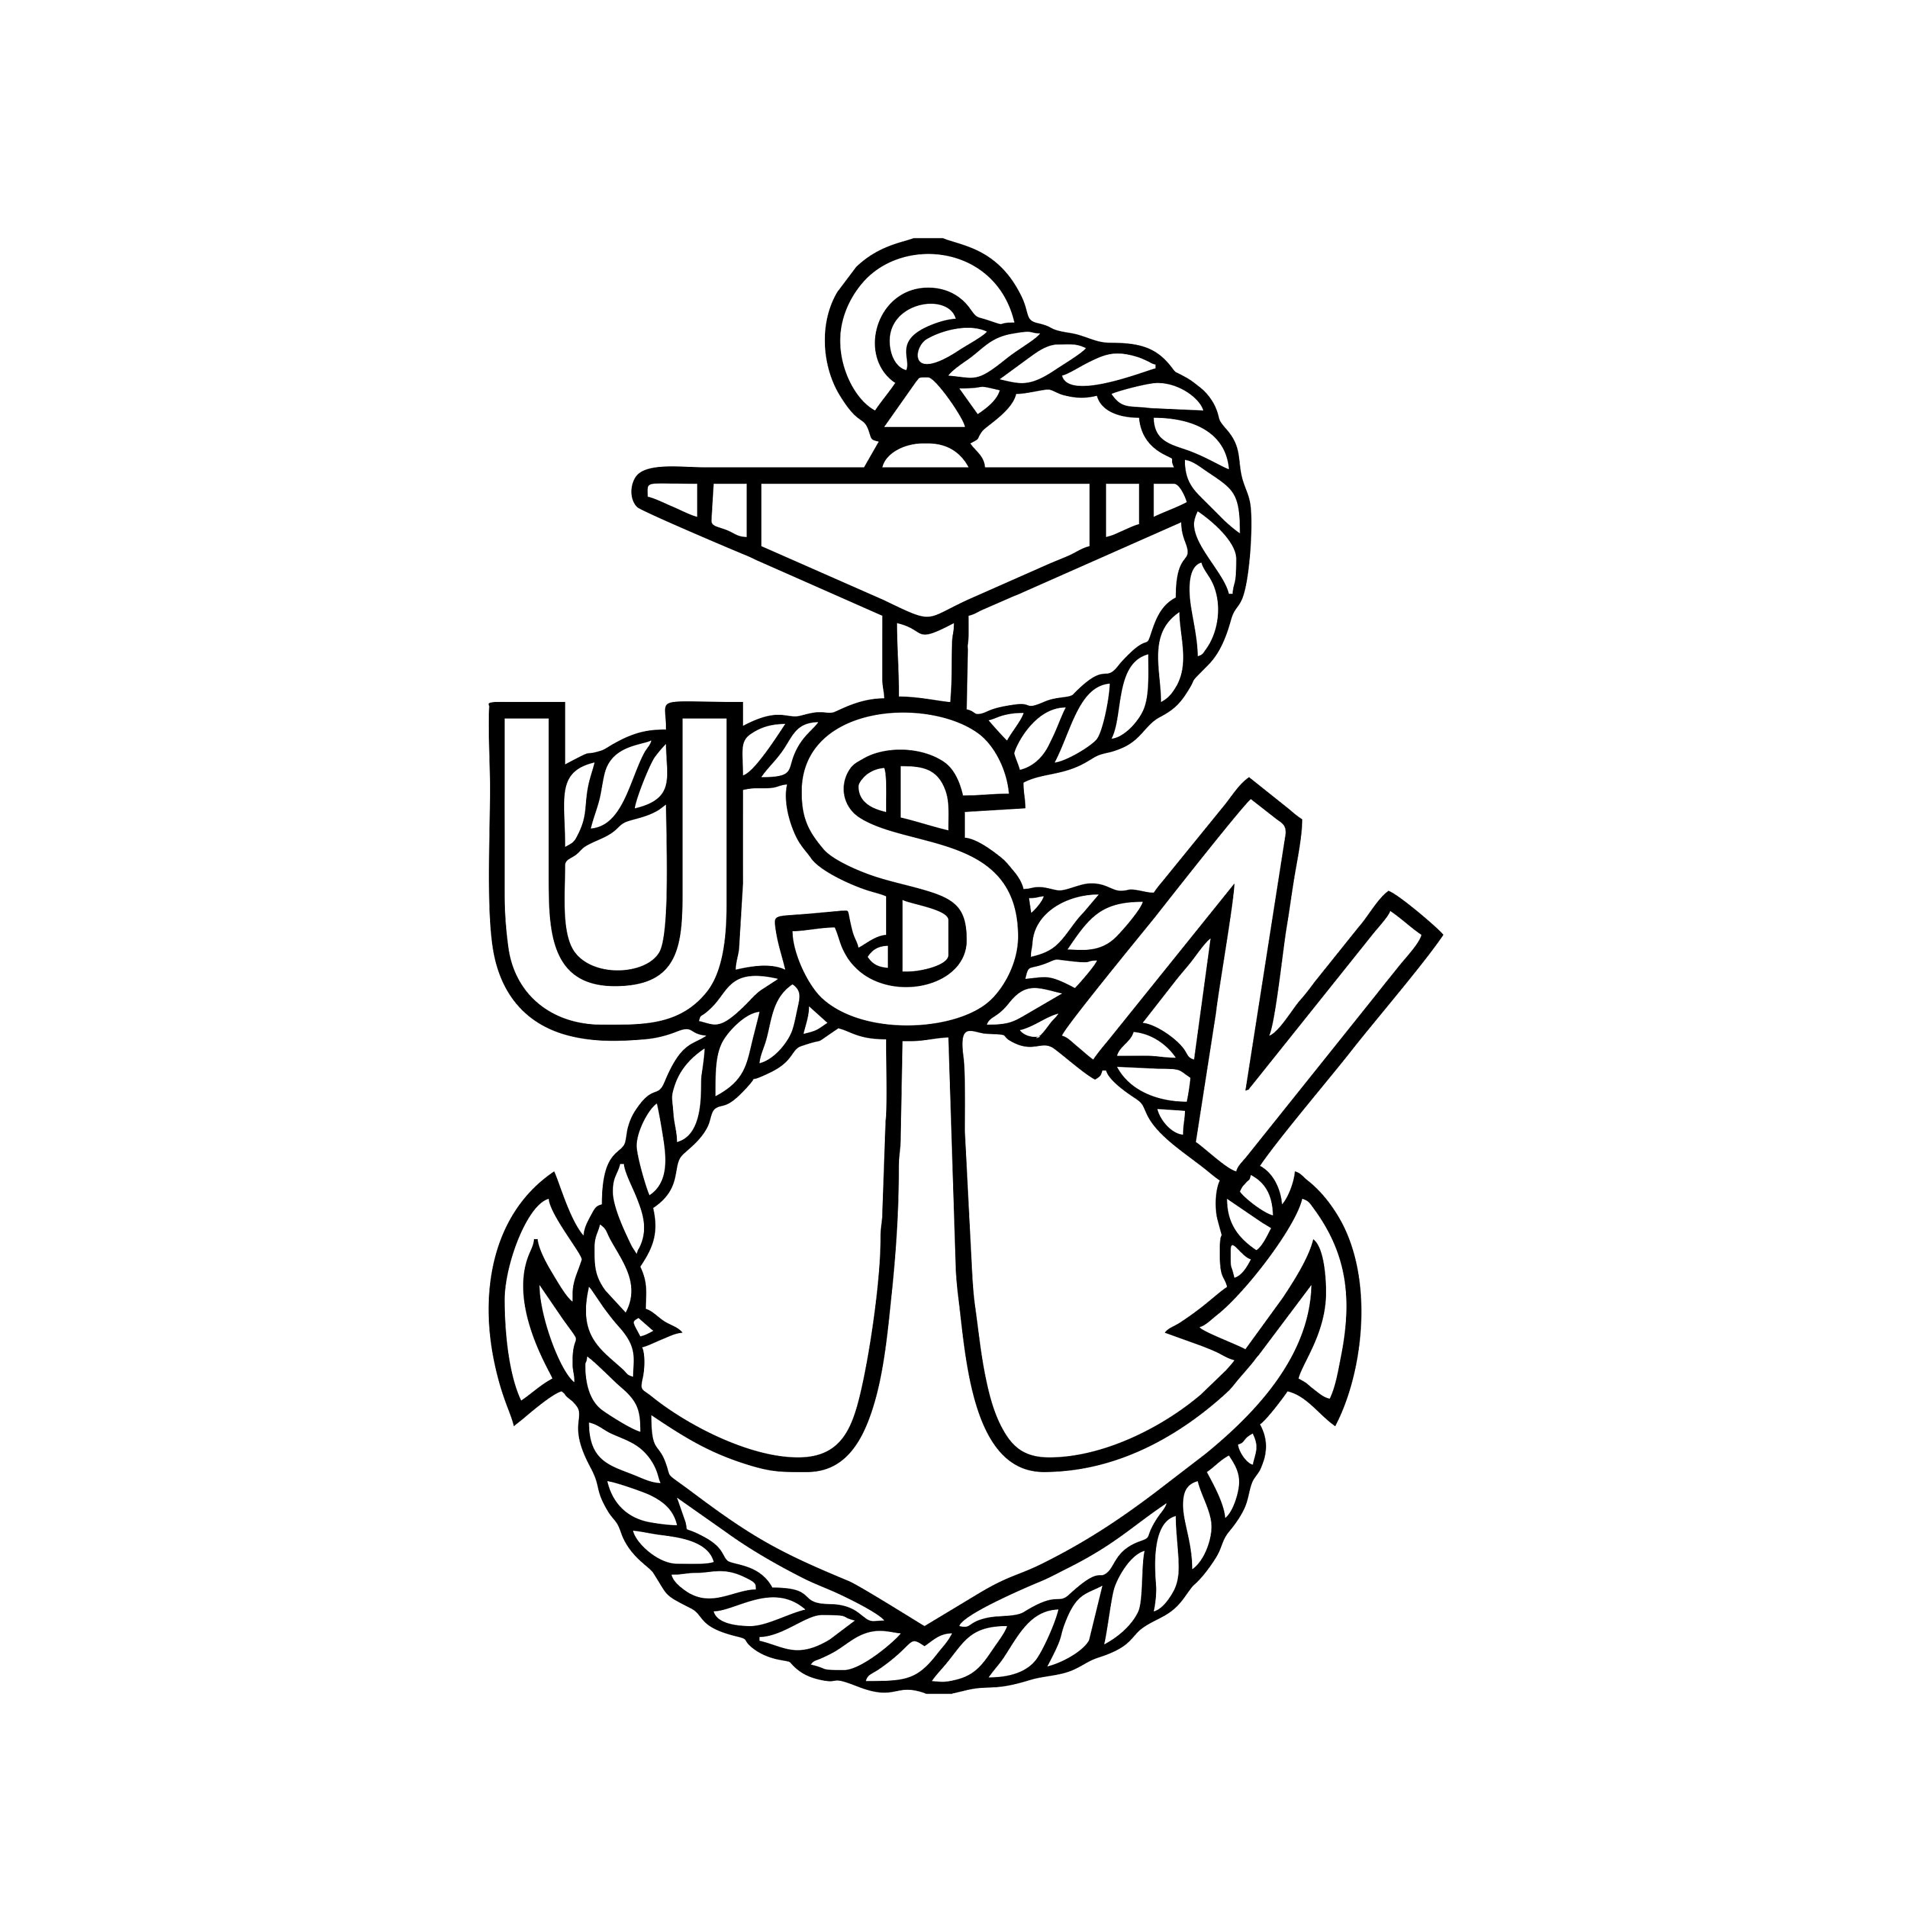 US Navy Anchor SVG, PNG, AI, EPS, DXF Files For Cut Projects | lupon.gov.ph